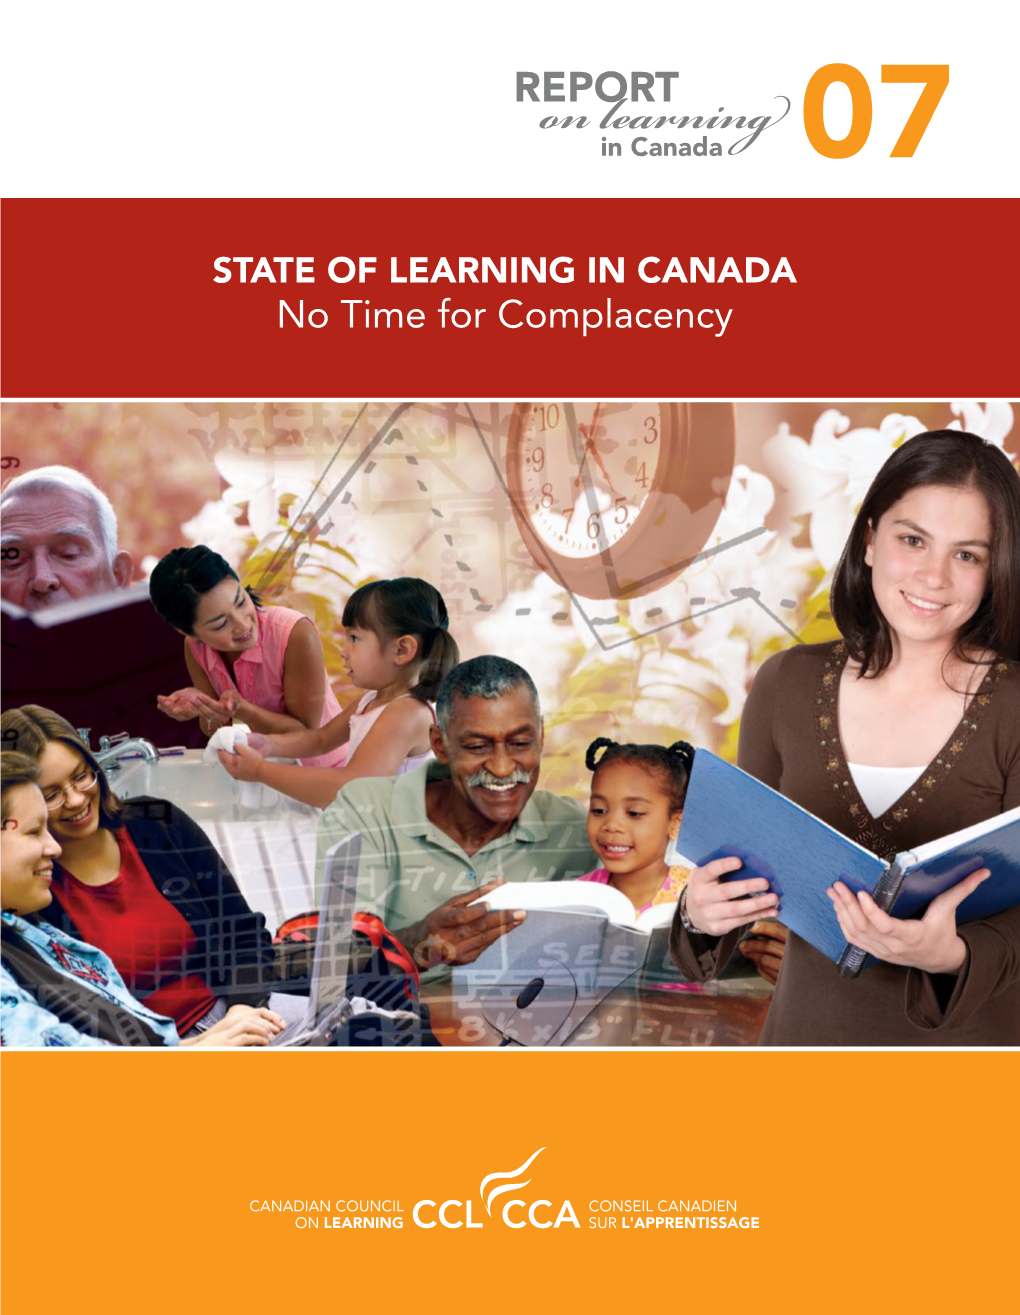 State of Learning in Canada: No Time for Complacency,” Report on Learning in Canada 2007 (Ottawa: 2007)